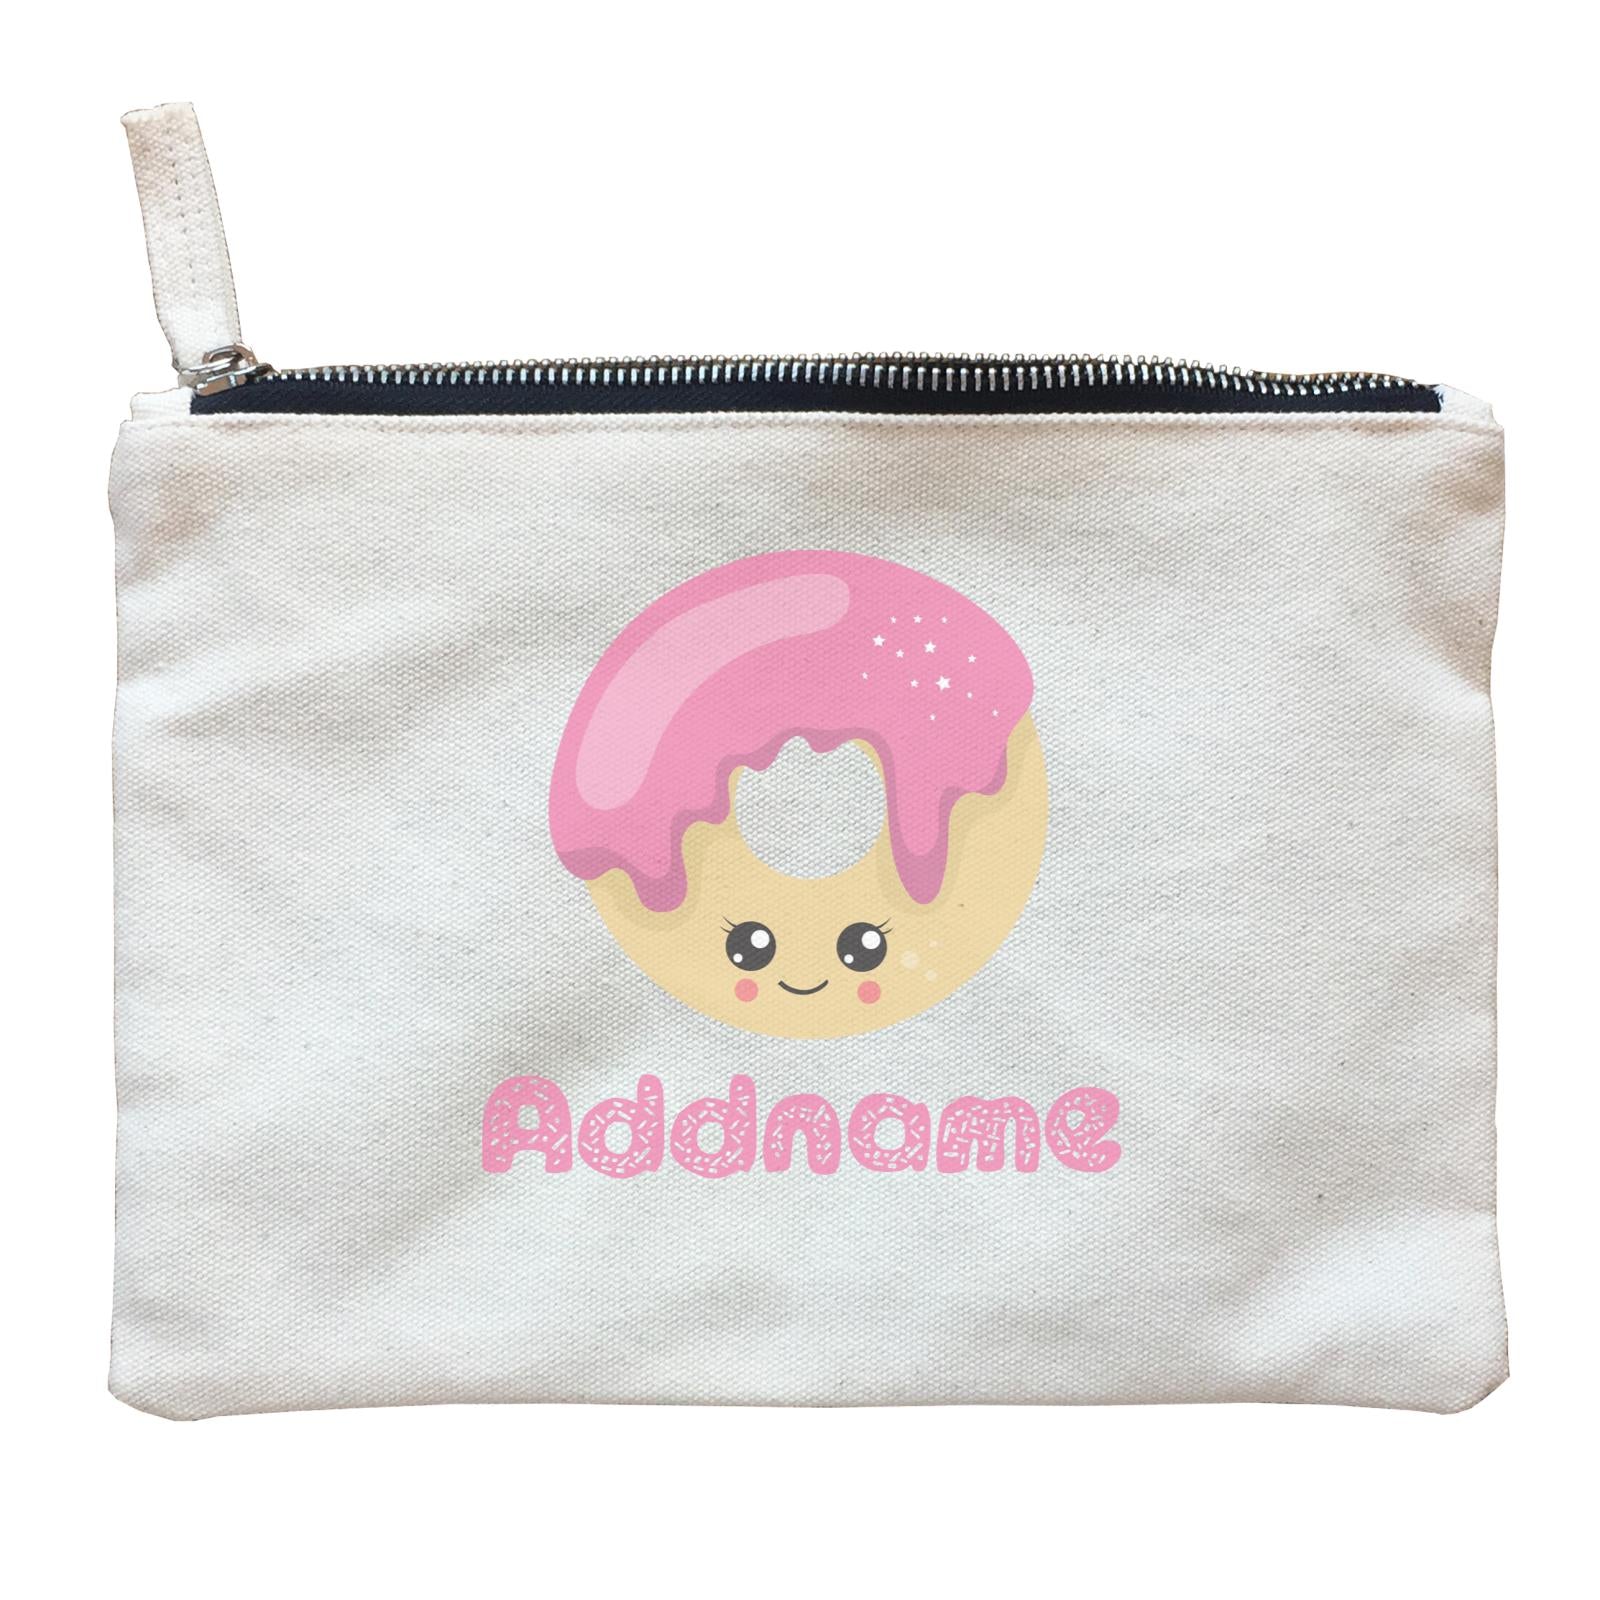 Magical Sweets Pink Donut Addname Zipper Pouch